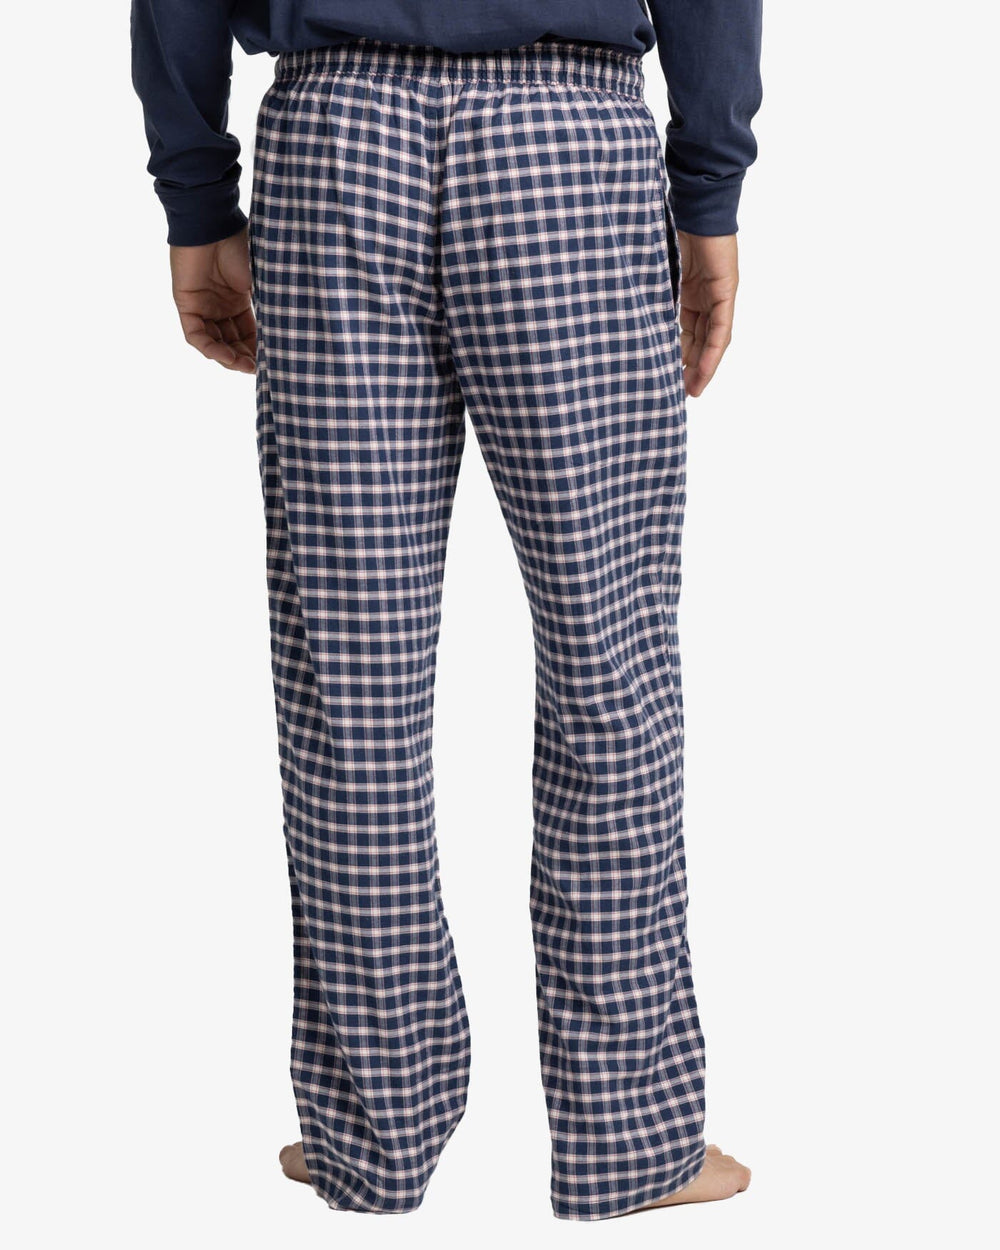 The back view of the Southern Tide Silverleaf Plaid Lounge Pant by Southern Tide - Dress Blue